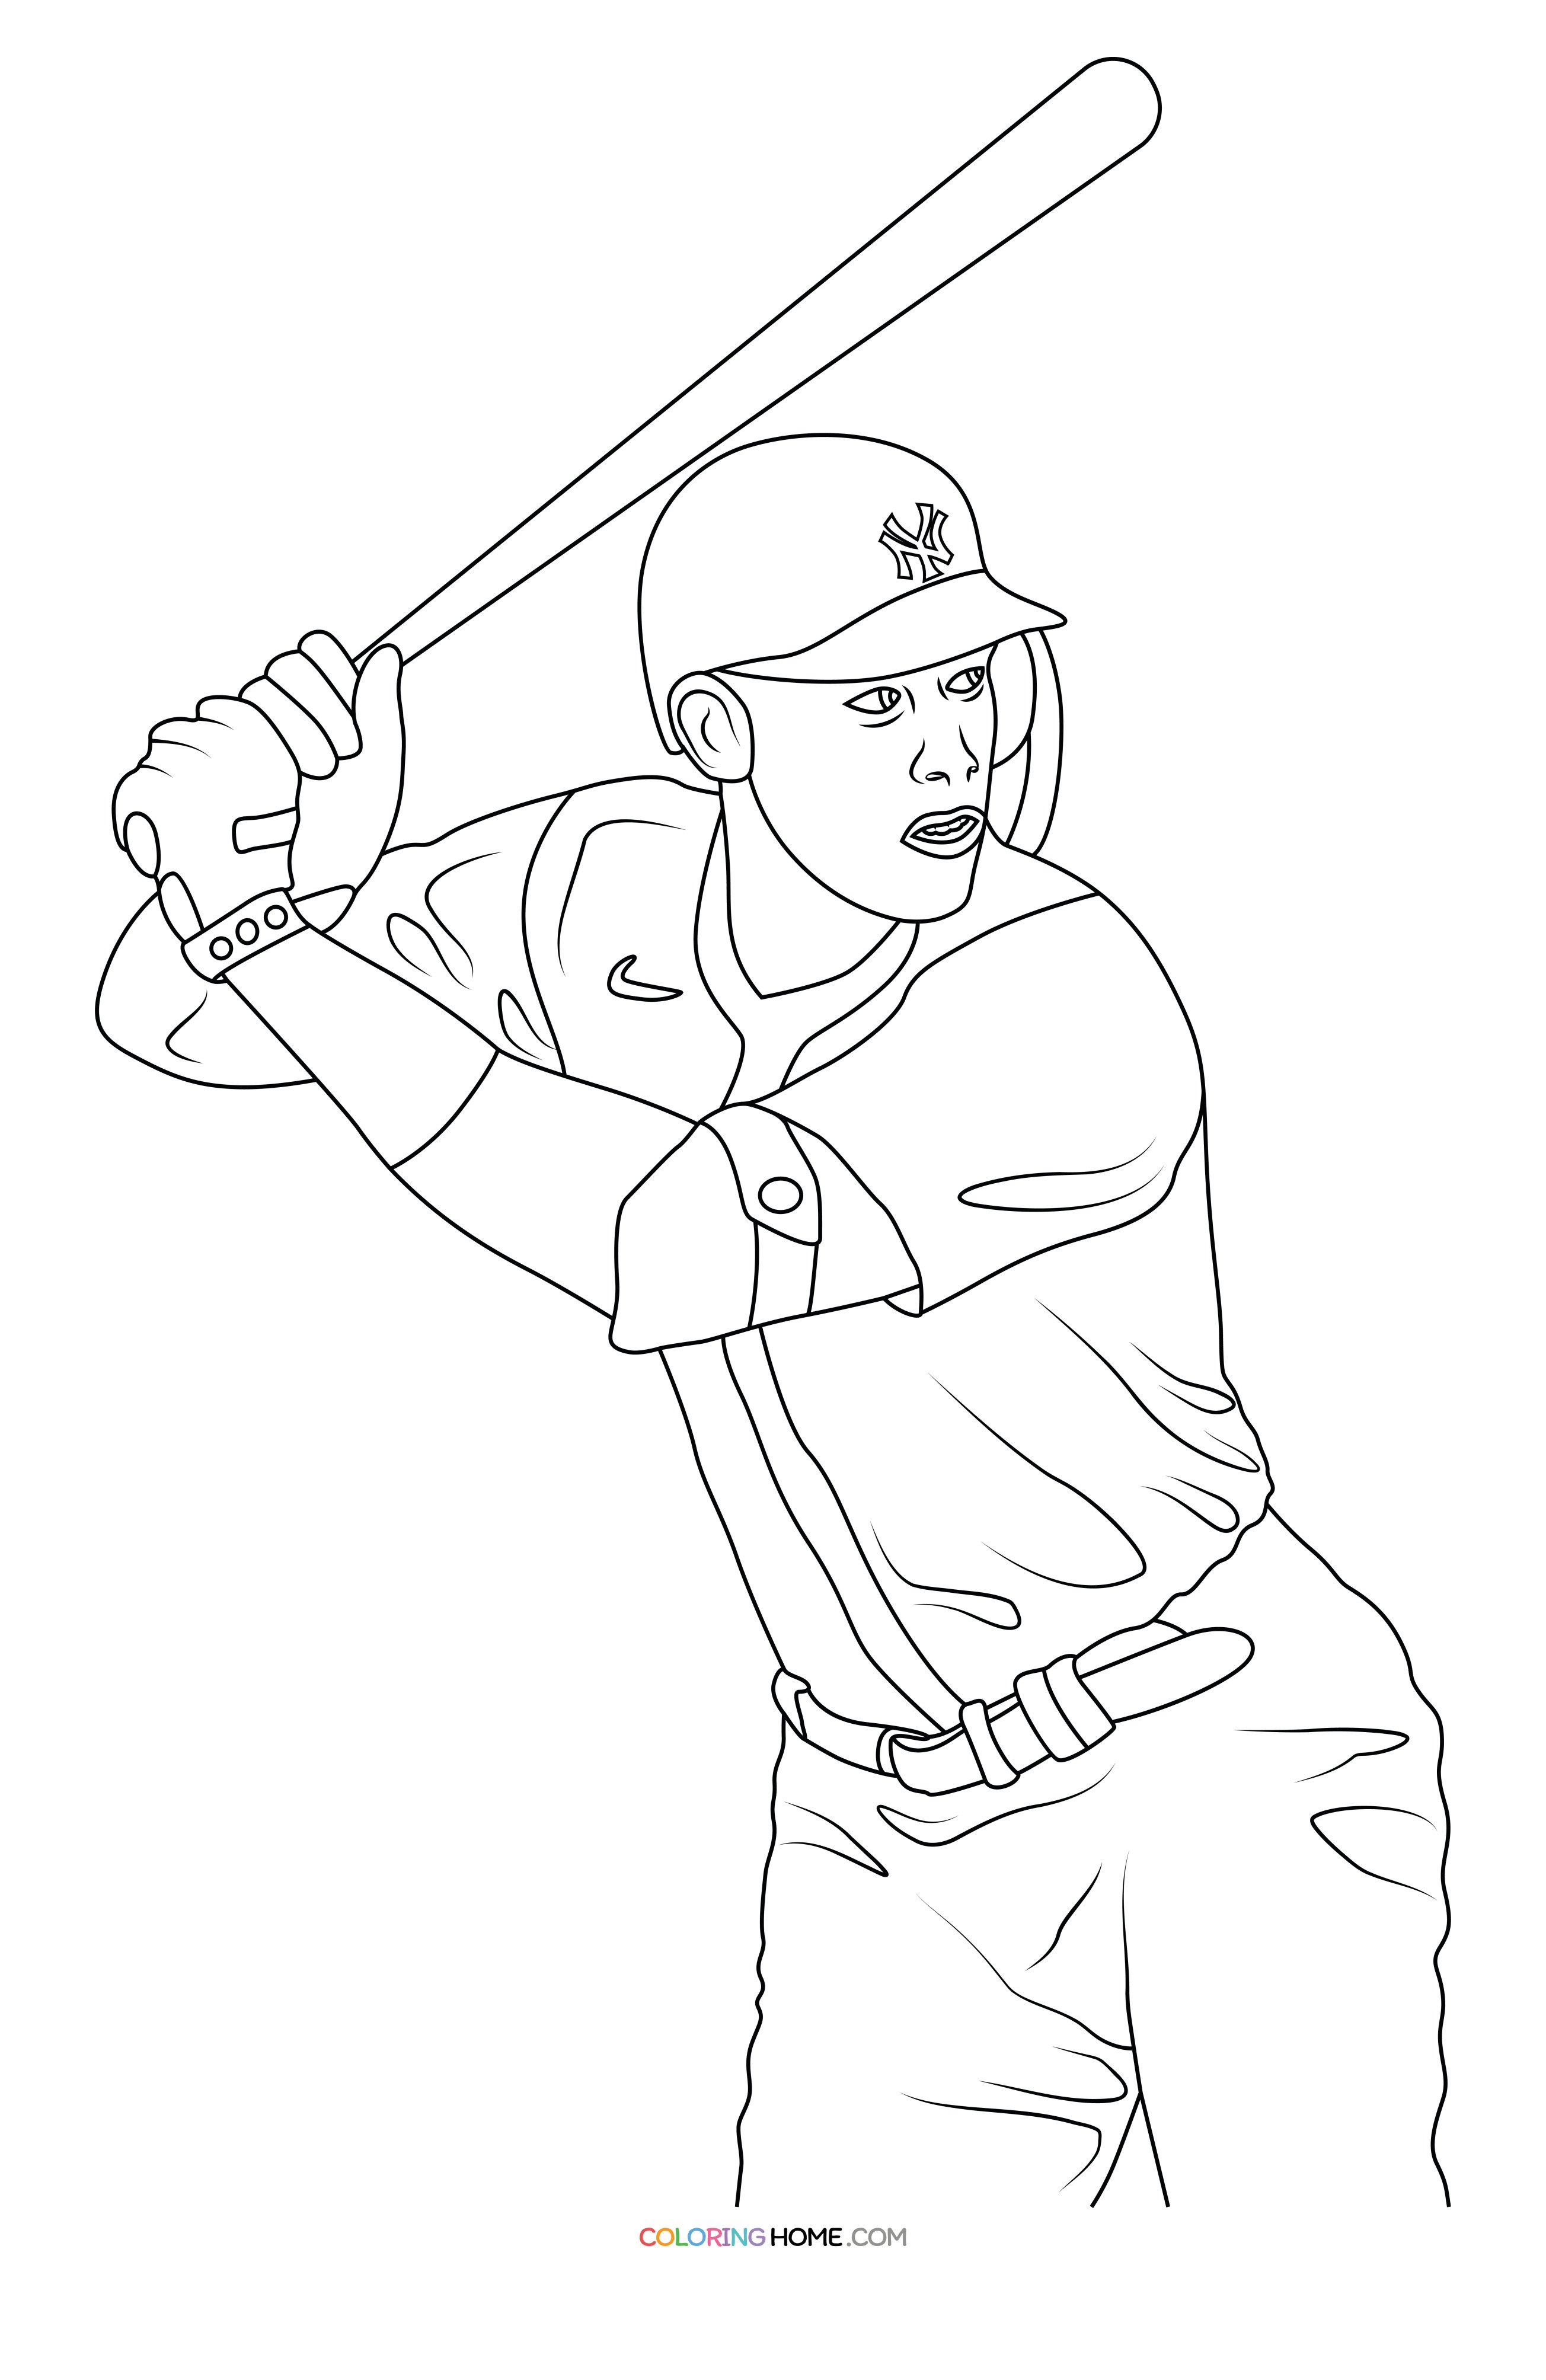 Aaron Judge coloring page